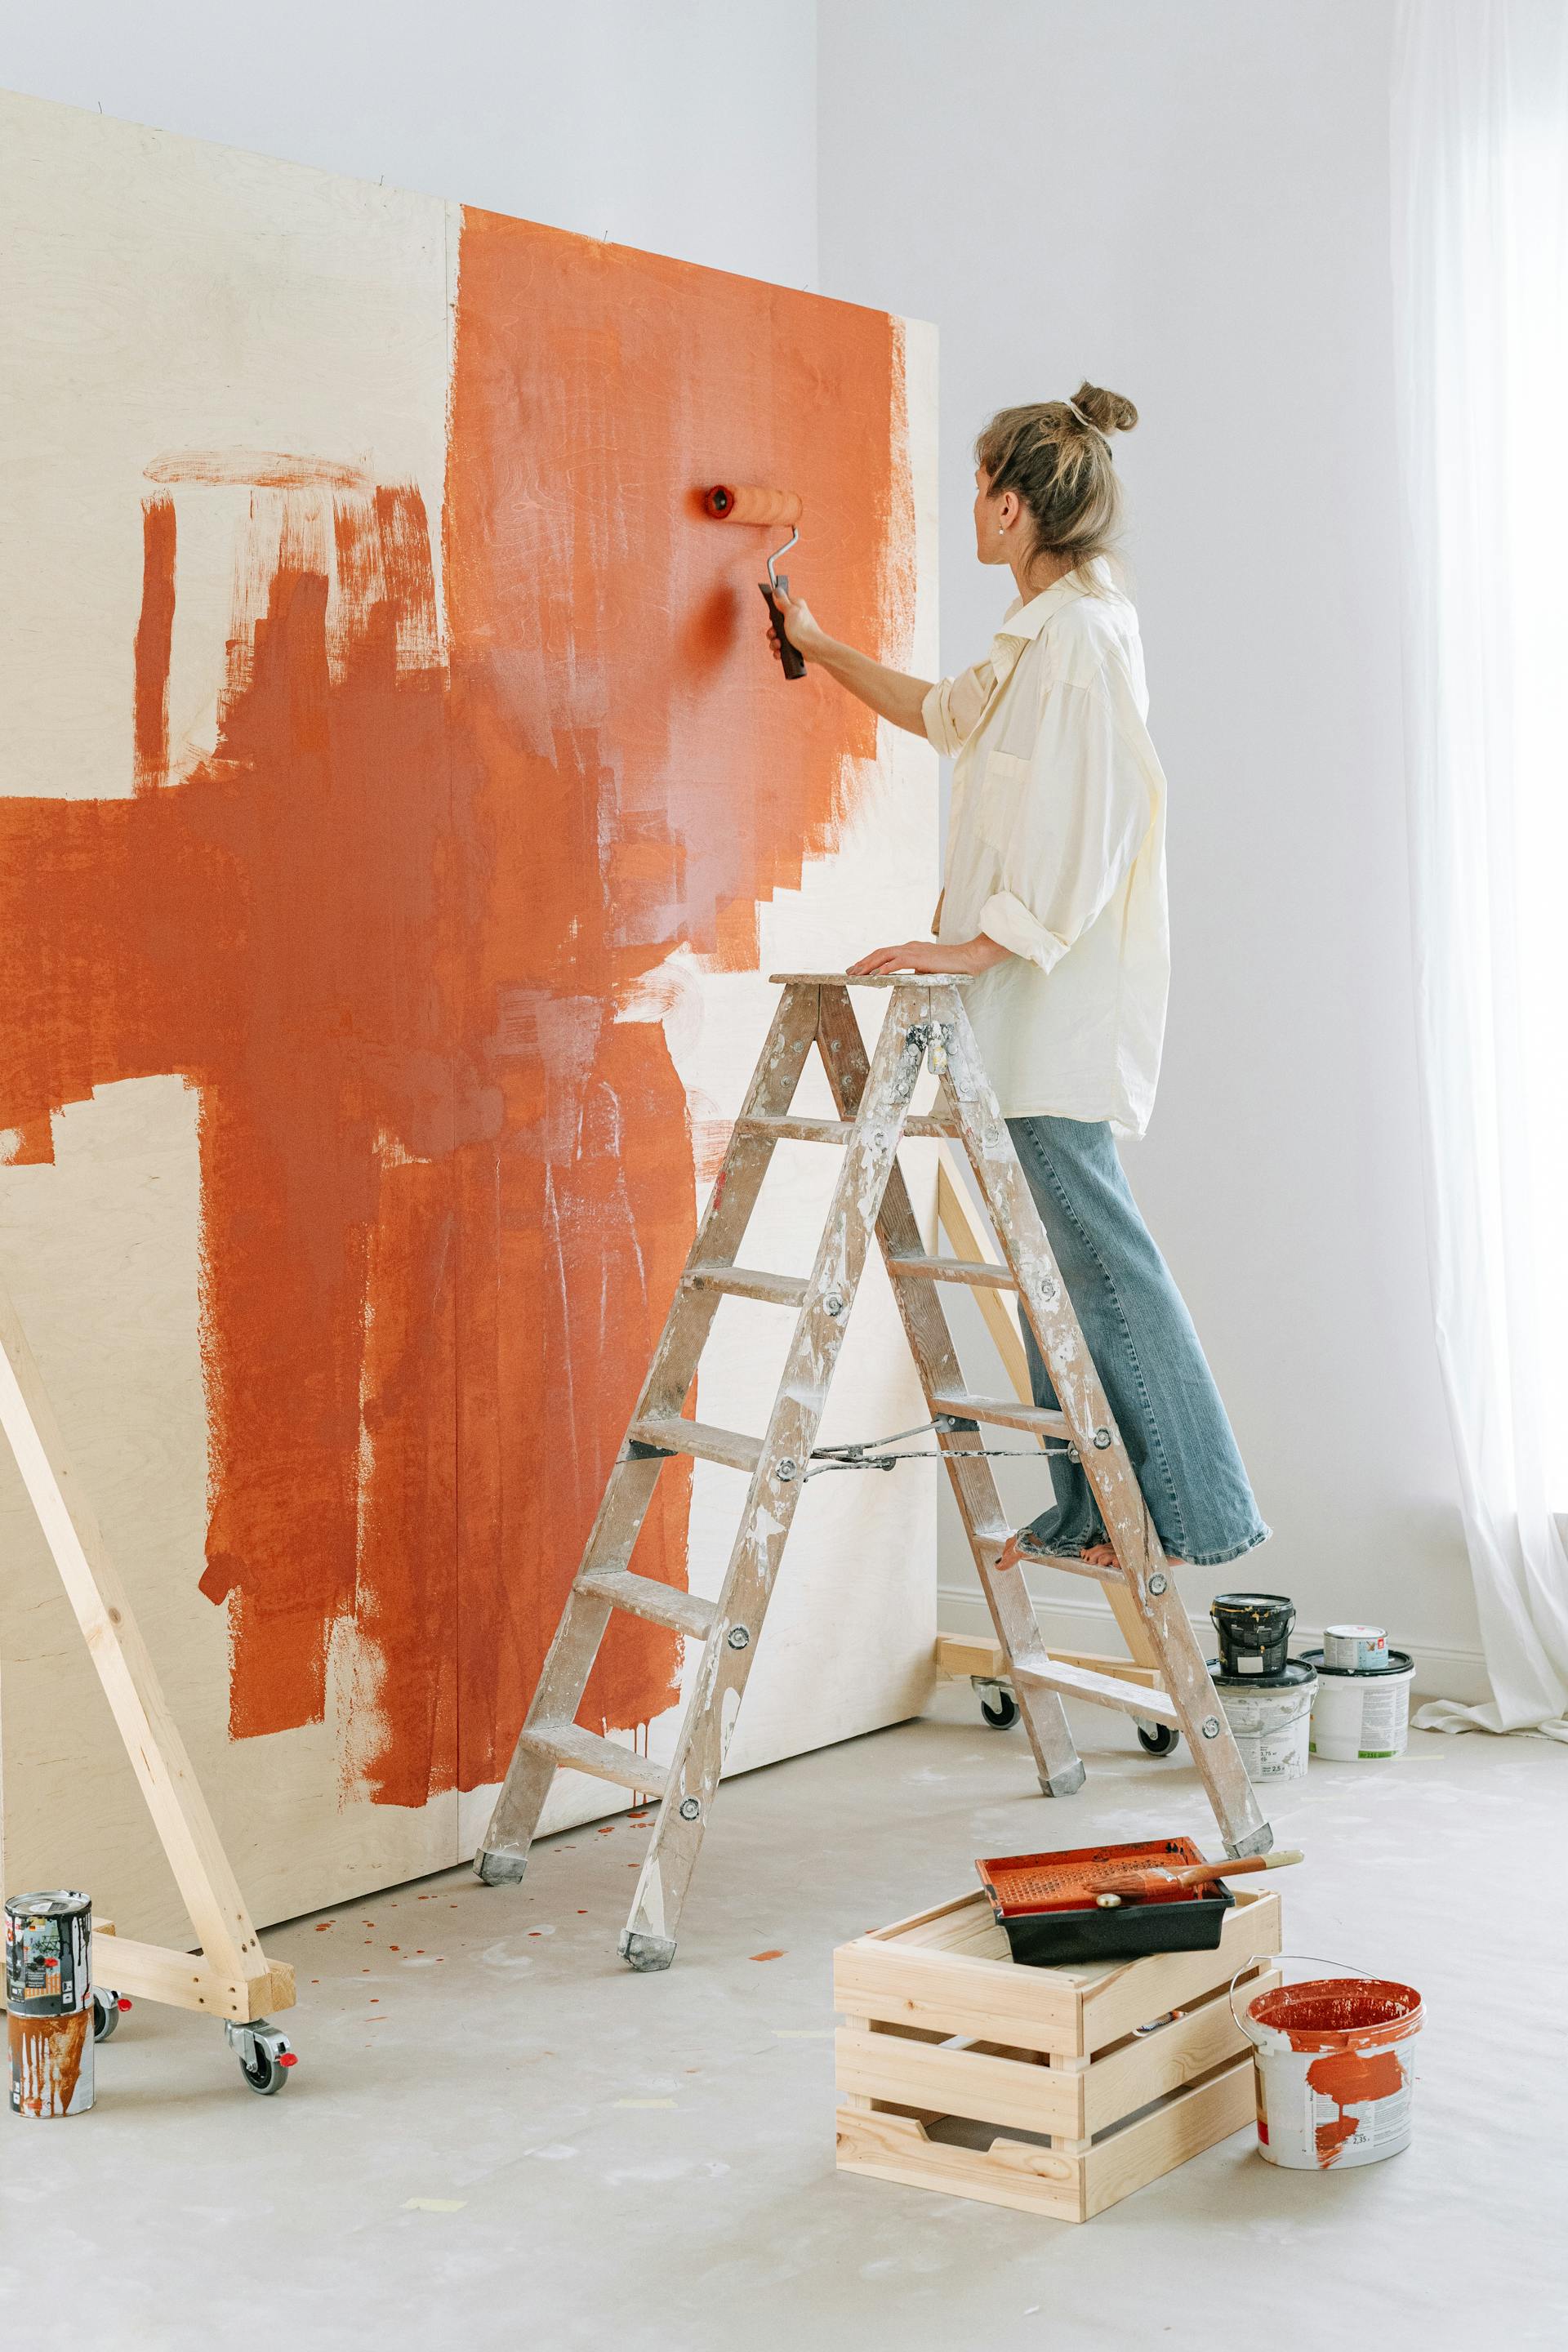 A woman painting a wall | Source: Pexels